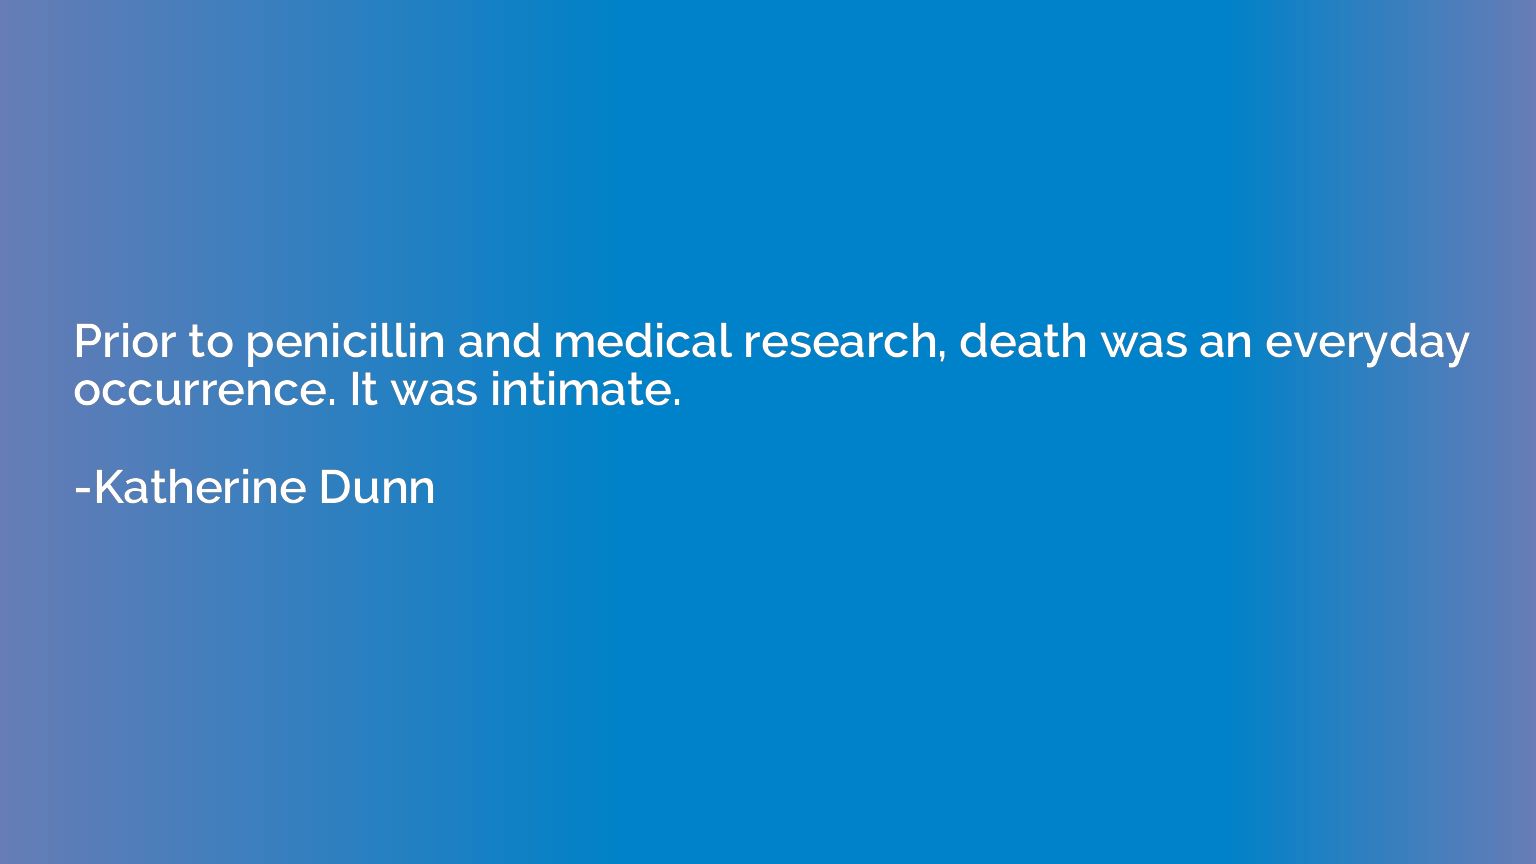 Prior to penicillin and medical research, death was an every